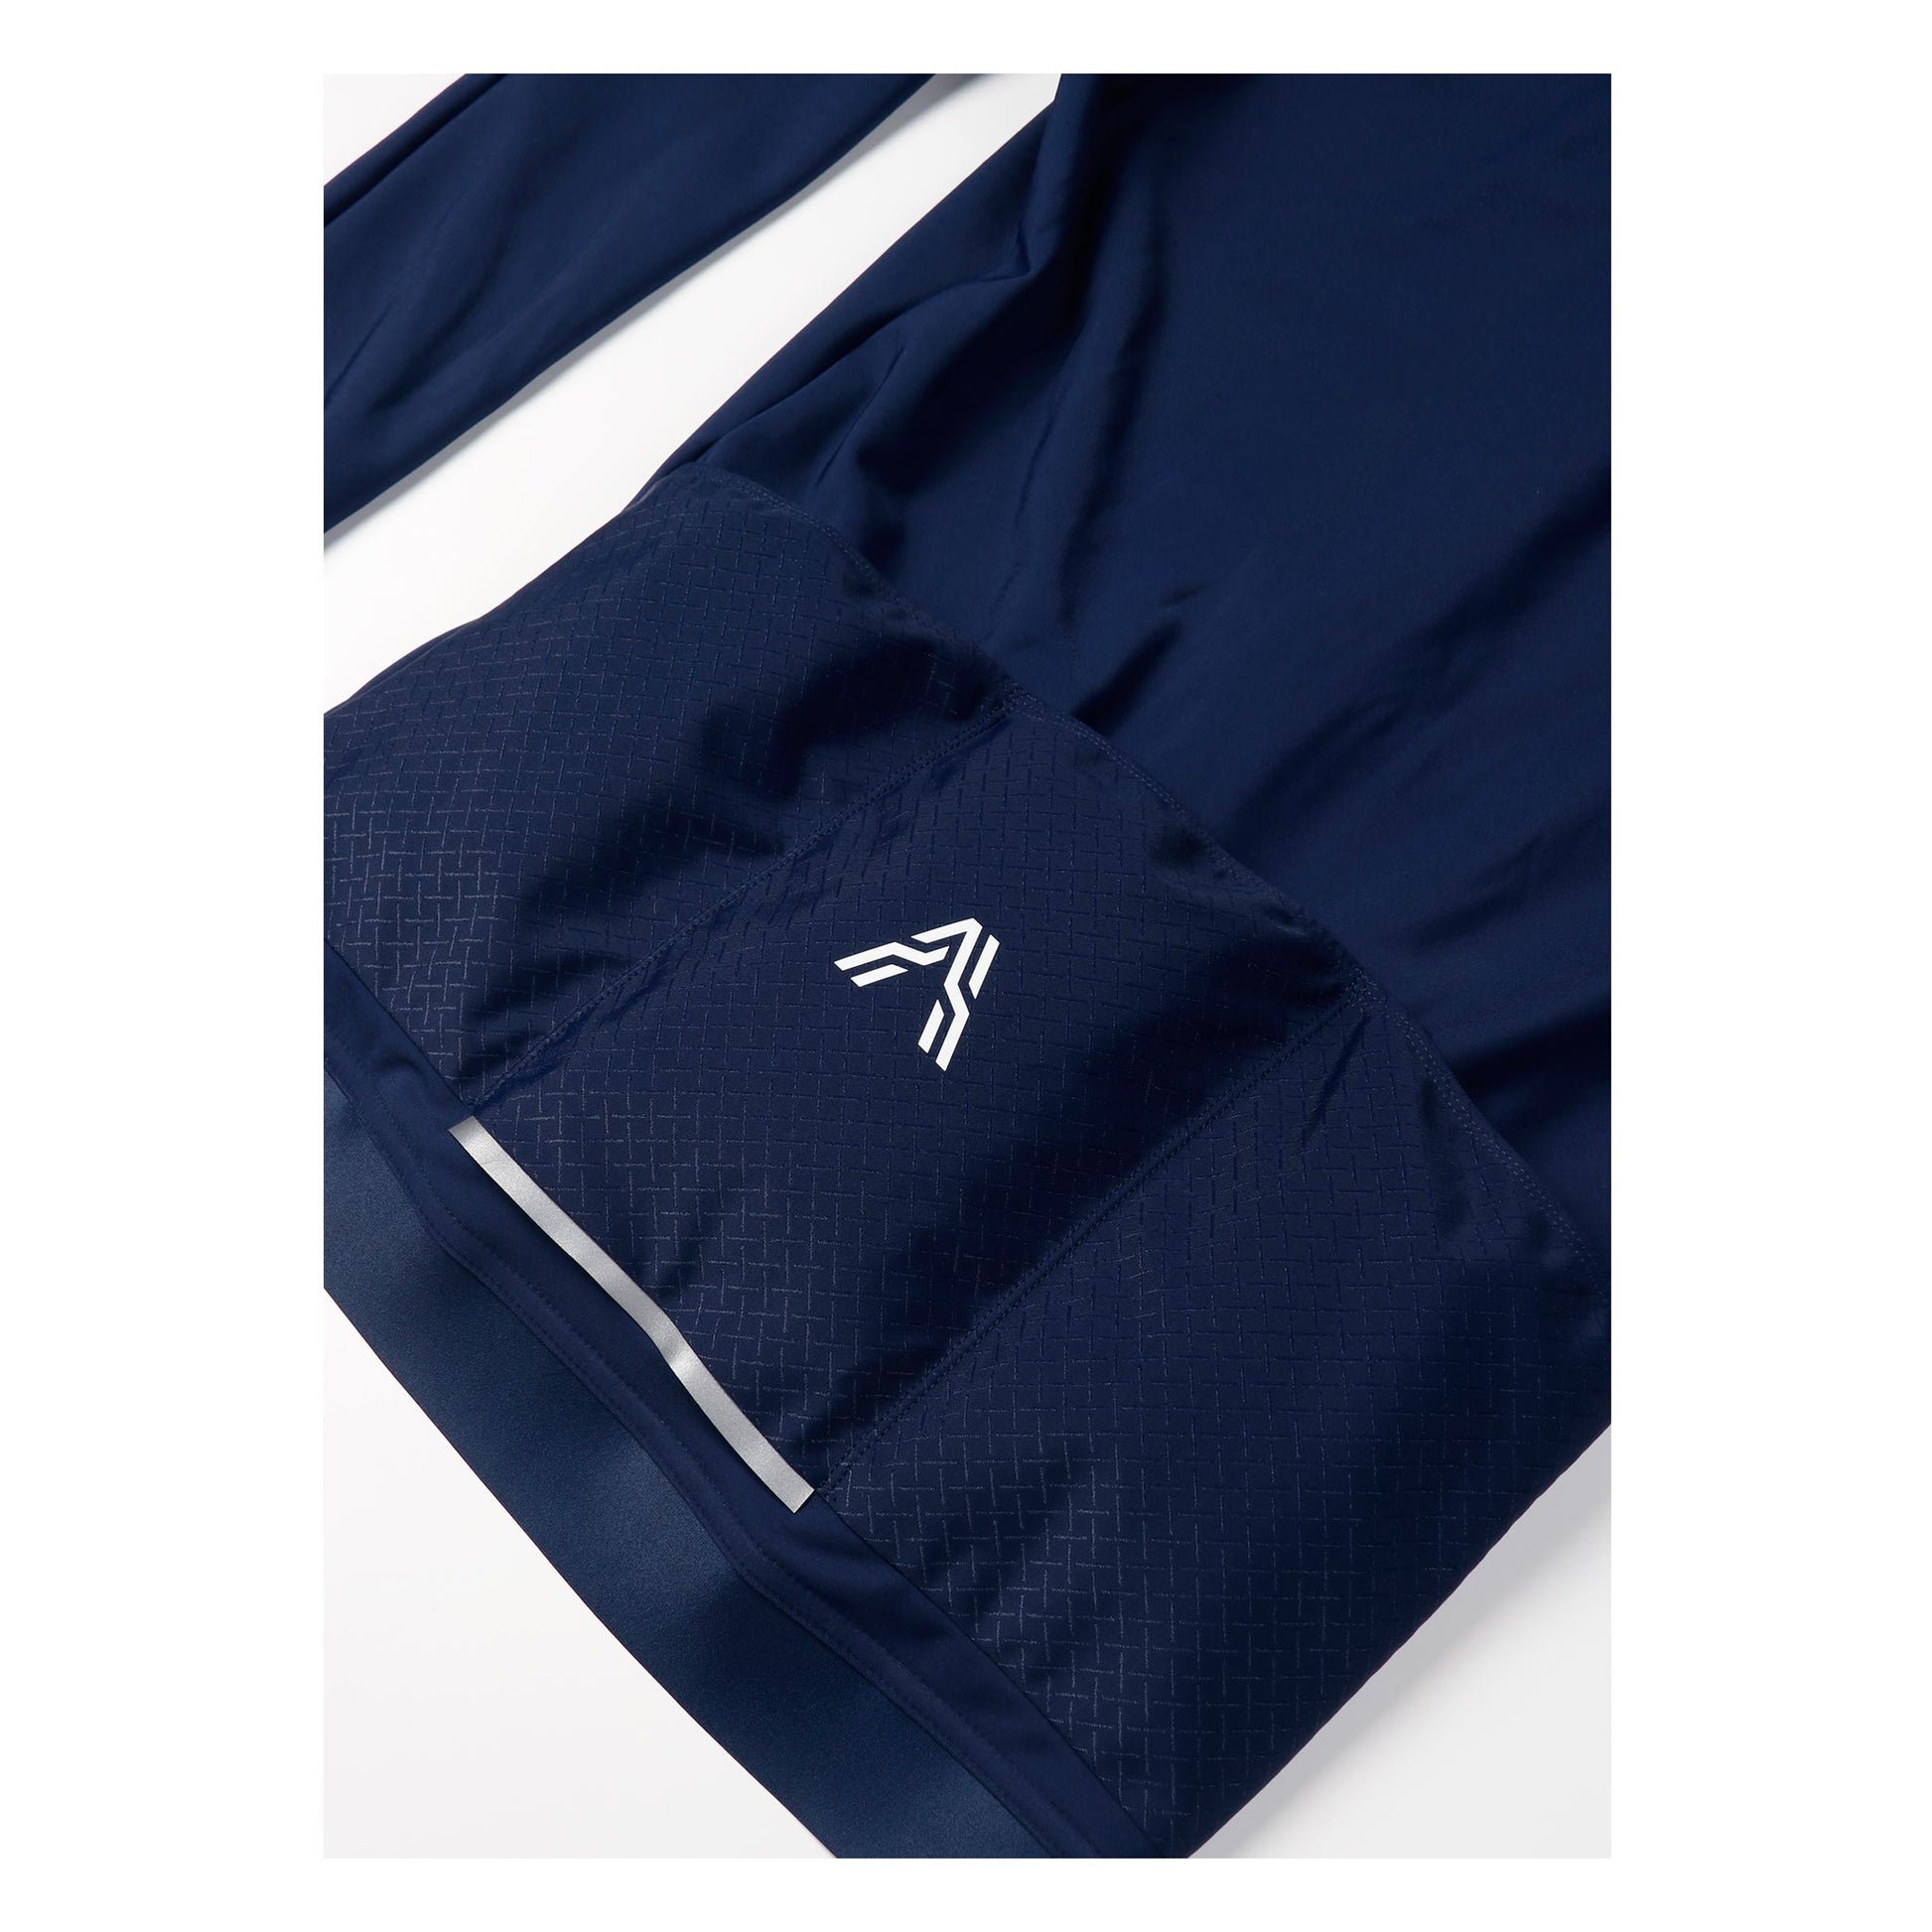 Milano Thermal Long Sleeve Jersey Navy from Ascender Cycling Club Zürich Switzerland Logo and Backpocket with Premium Italian Fabrics View